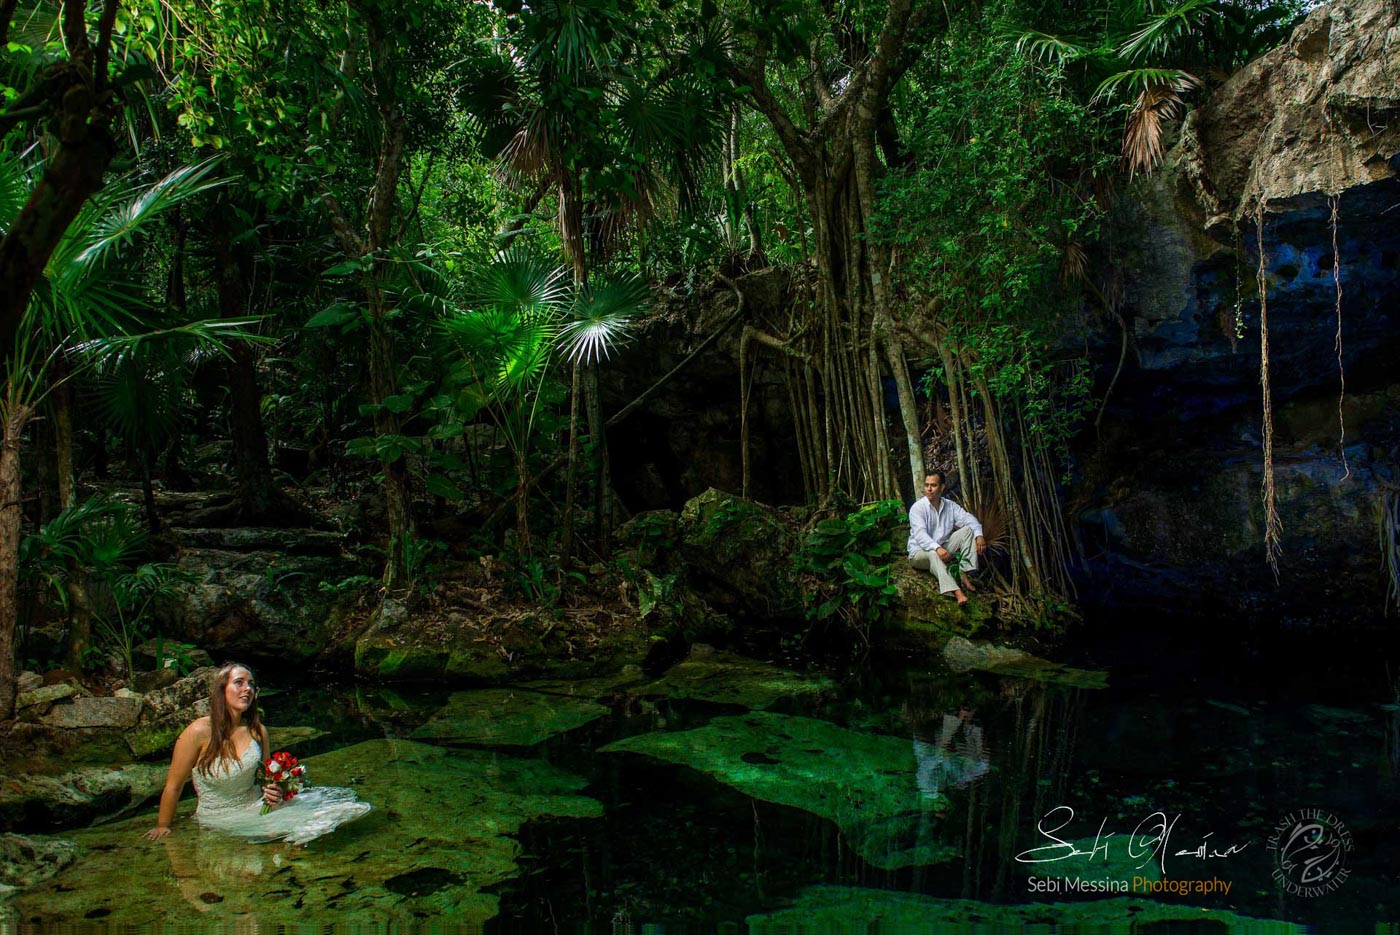 Post Wedding day in Mexico – Underwater Trash The Dress in a Mexican cenote - Heather and Carlos